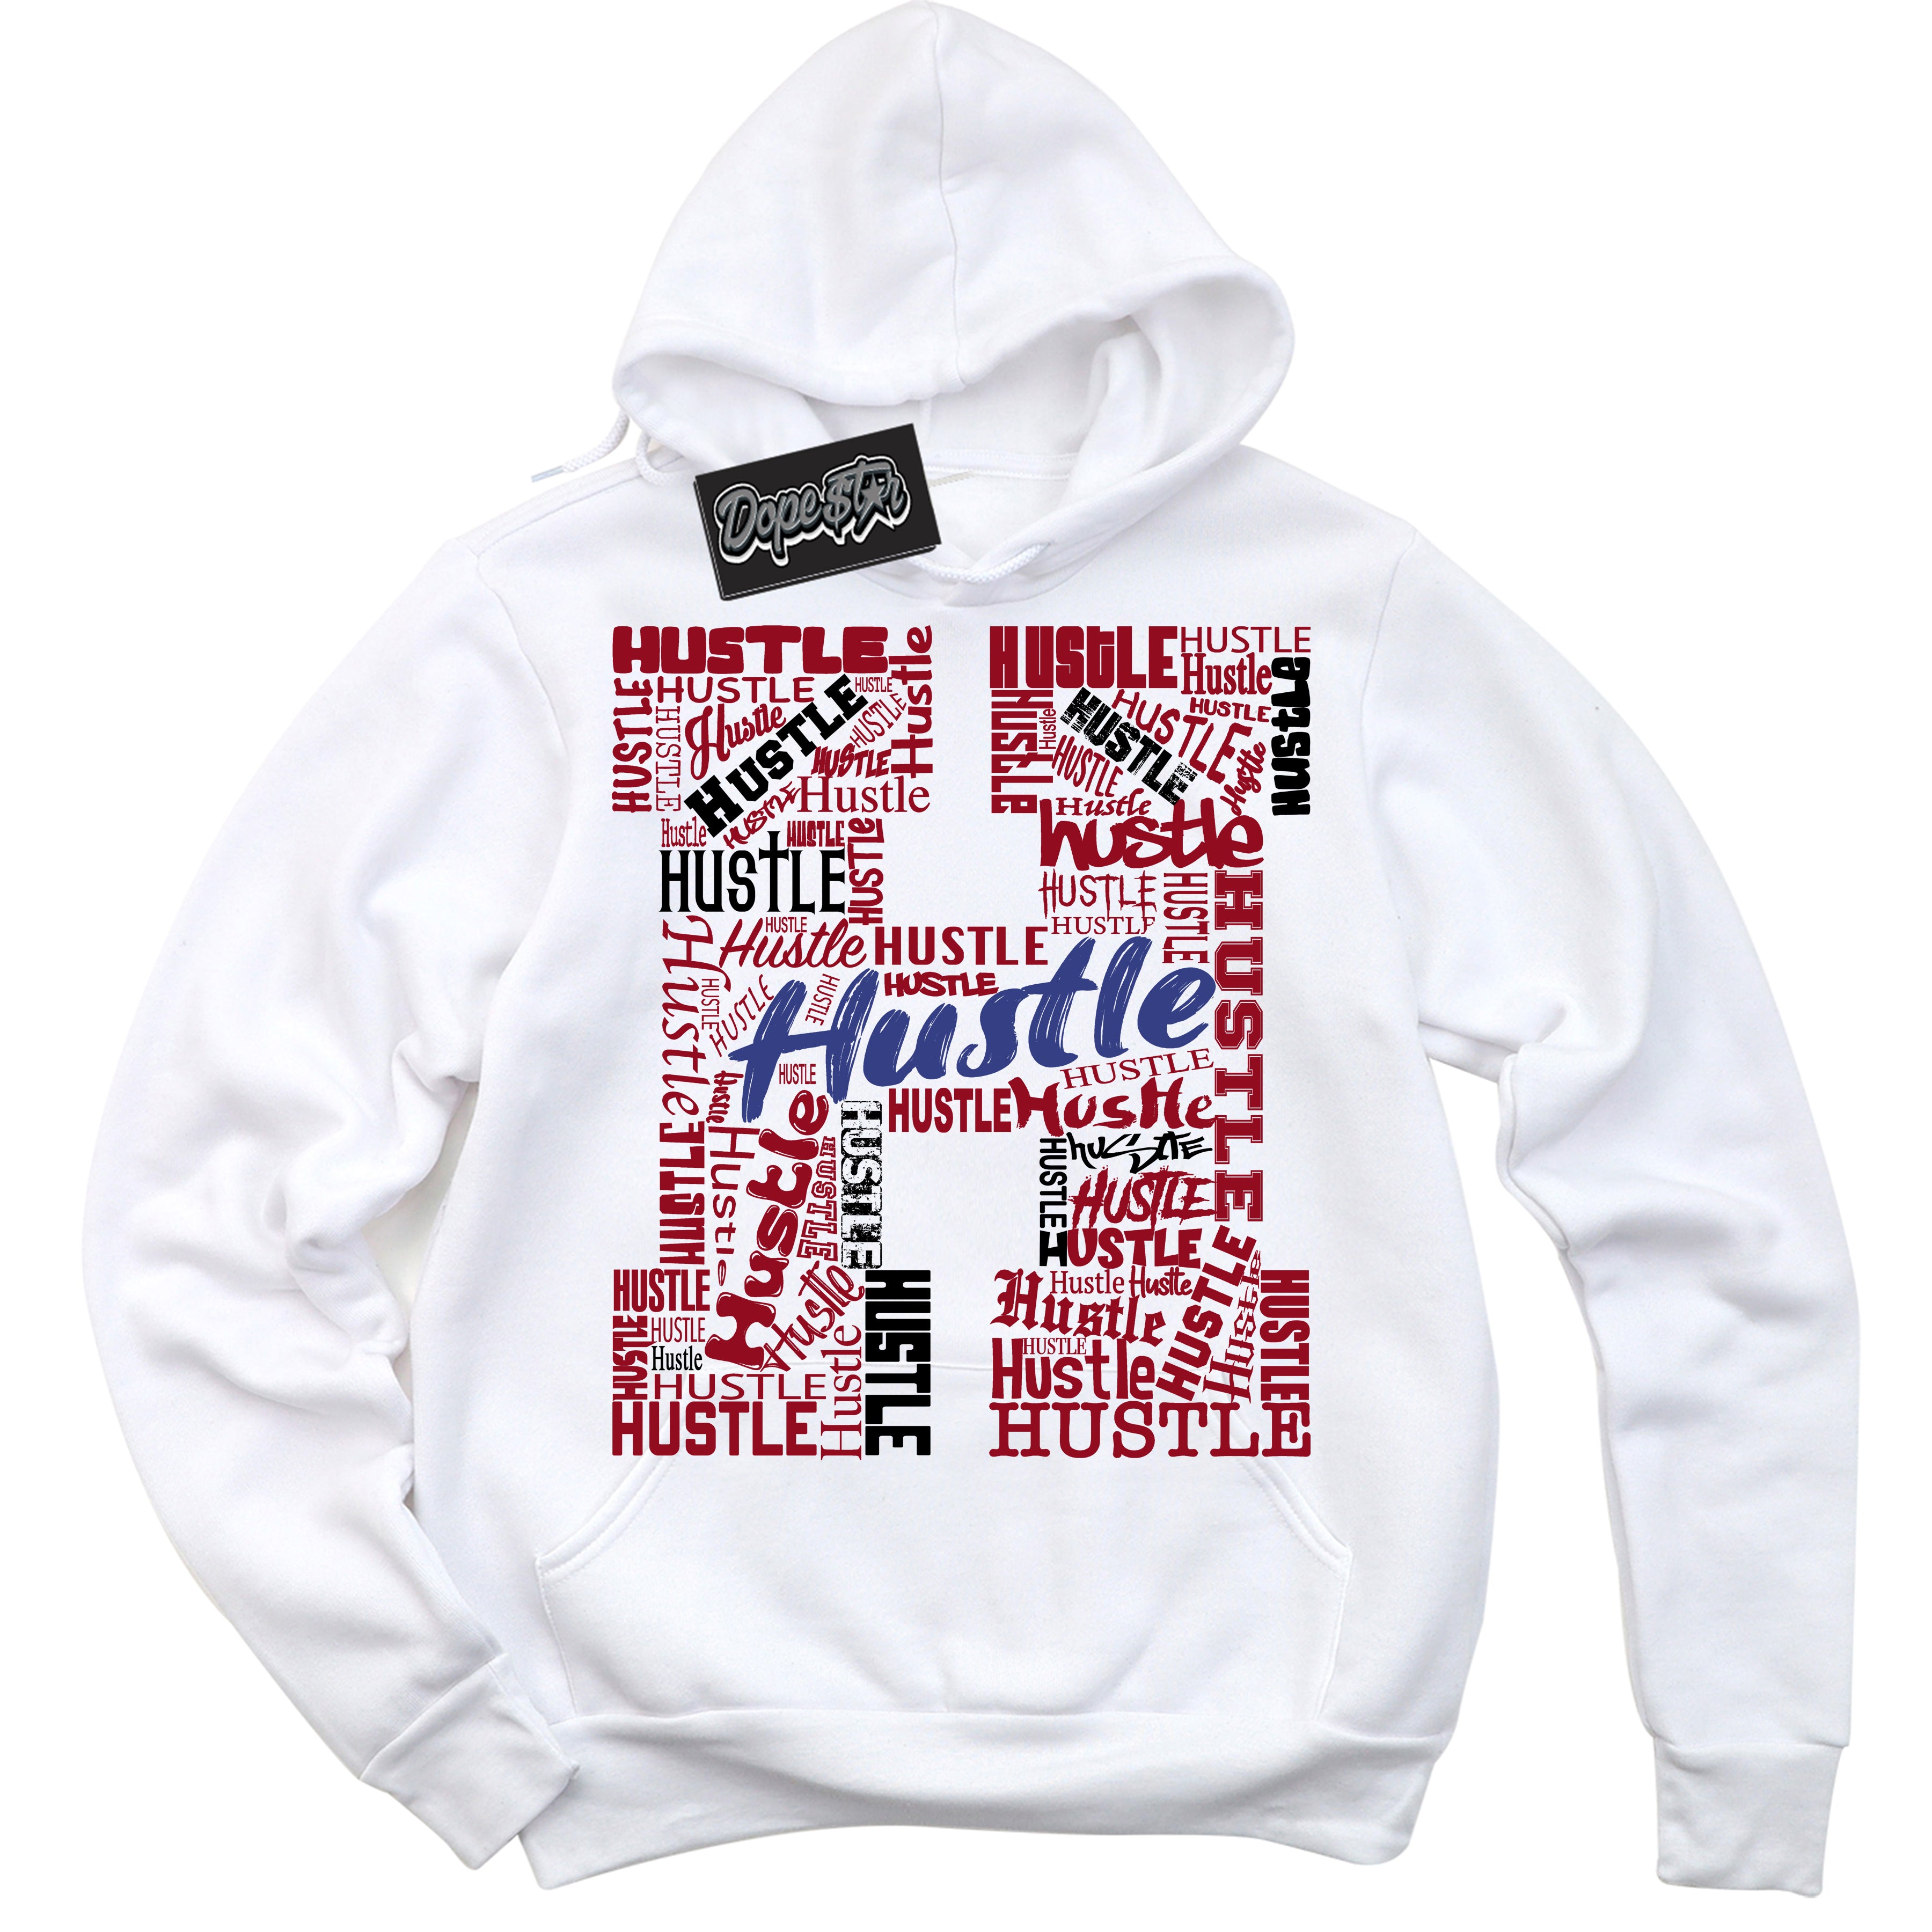 Cool White Hoodie with “ Hustle H ”  design that Perfectly Matches Playoffs 8s Sneakers.